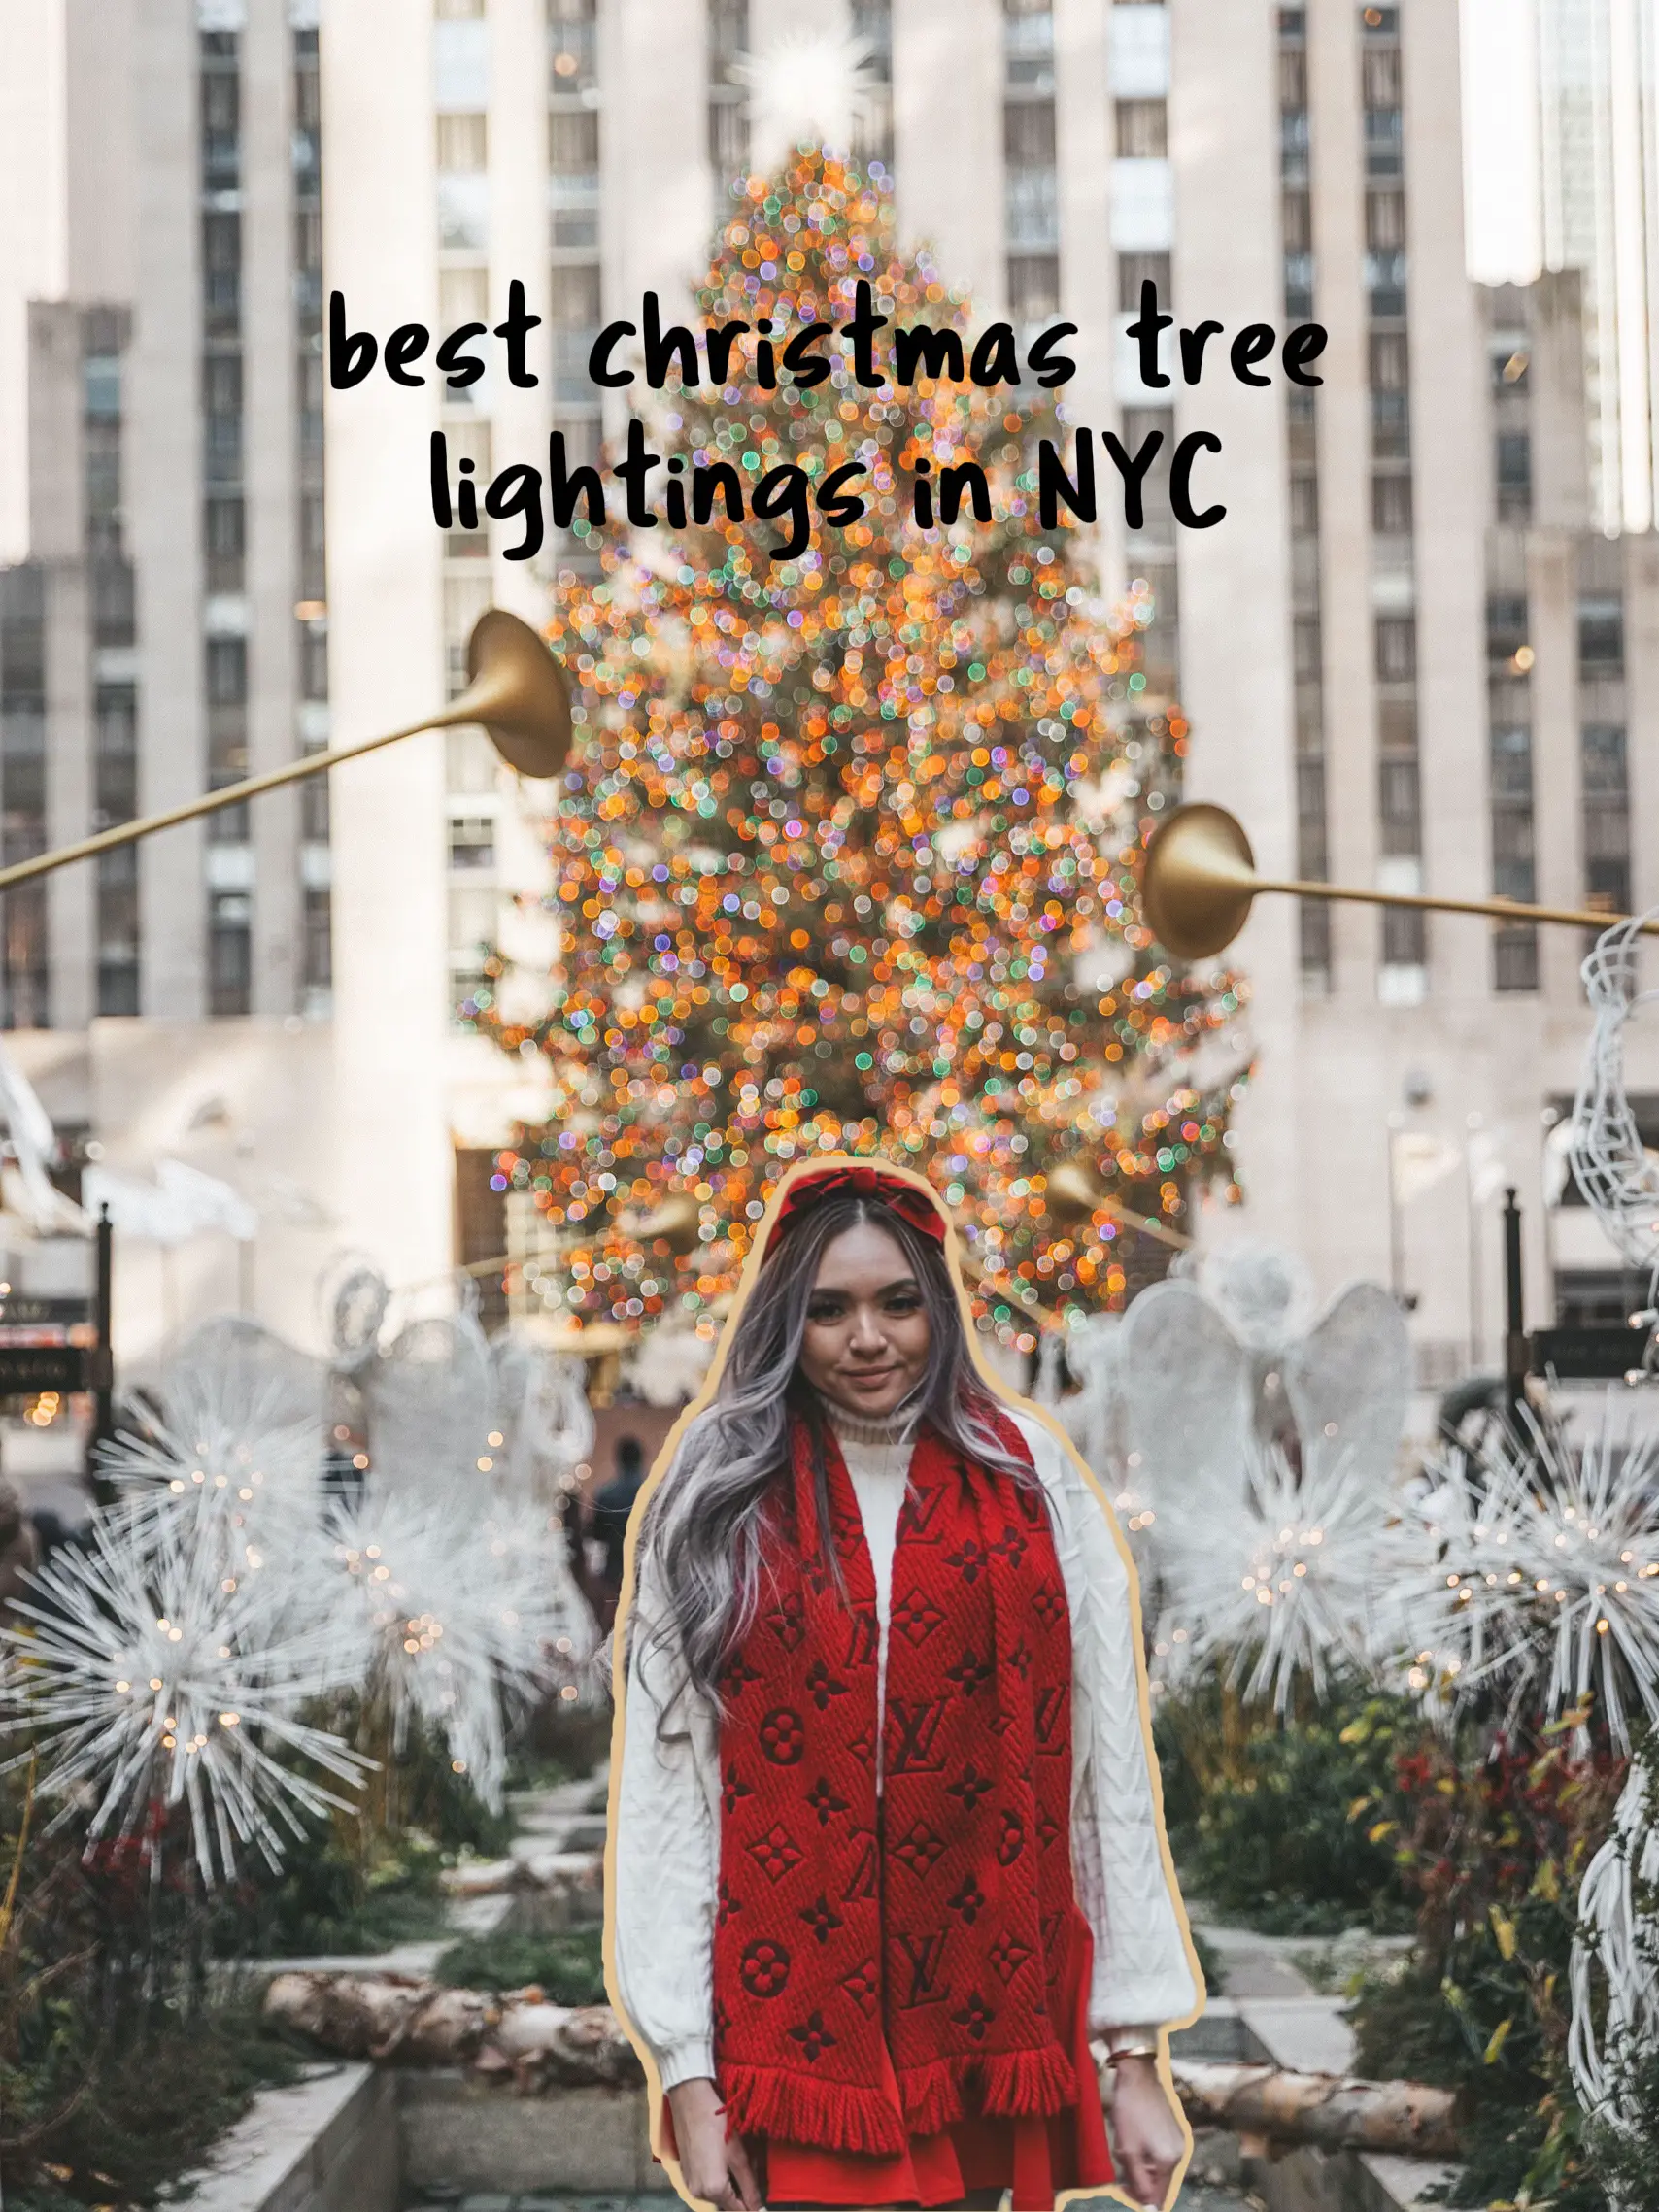  A woman in a red and white jacket is standing in front of a Christmas tree.